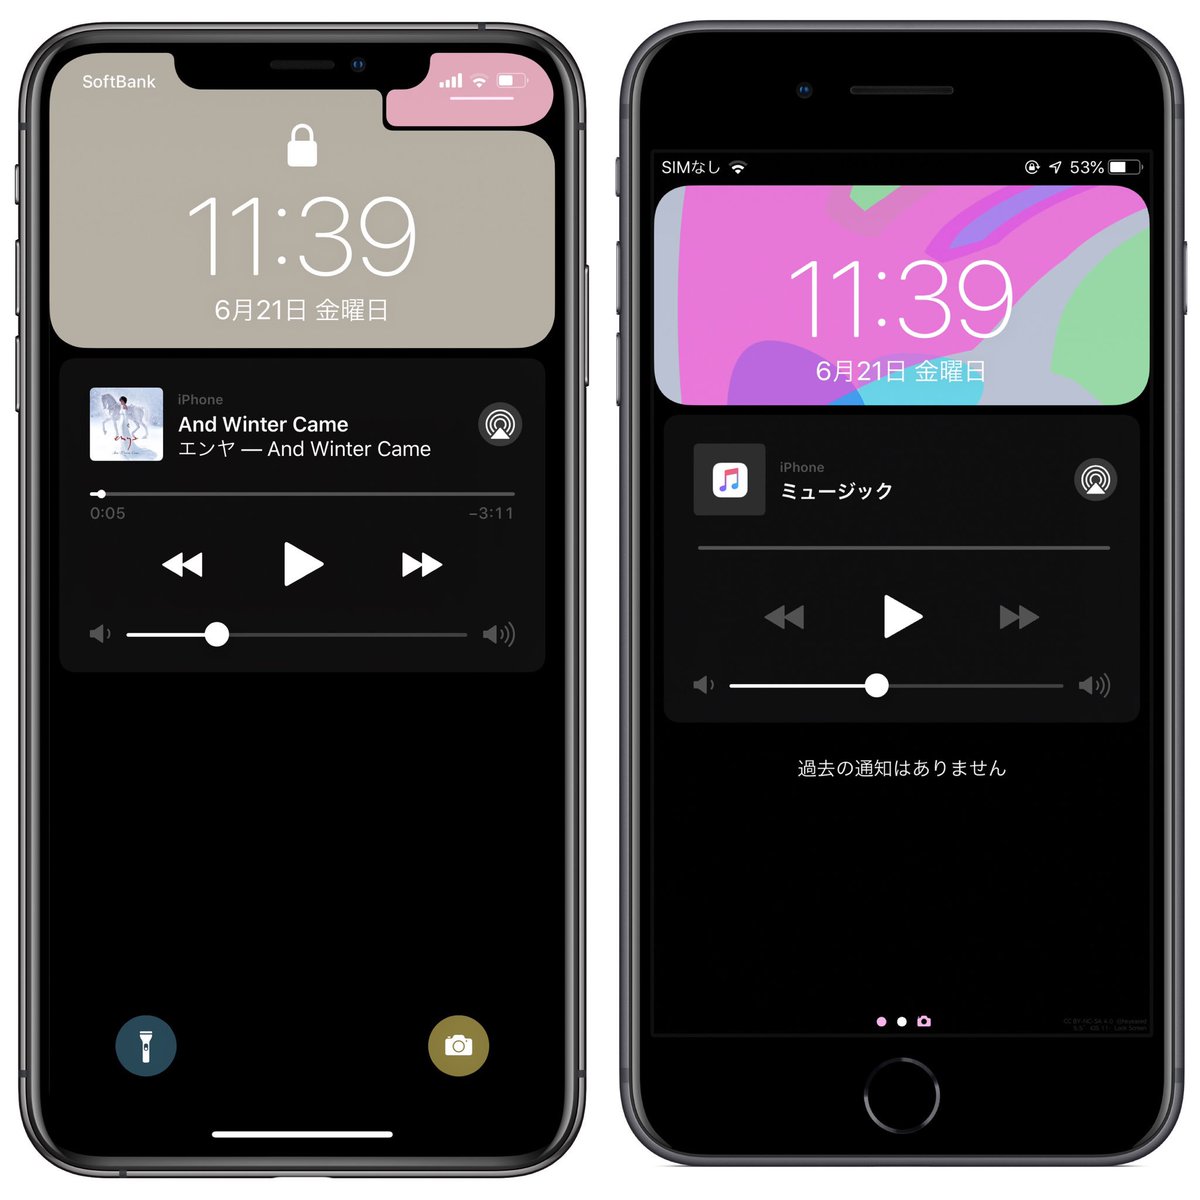 Hide Mysterious Iphone Wallpsper 不思議なiphone壁紙 ベゼルが棚を作るかのような壁紙 各iphone用セット Wallpaper As If The Bezel Makes A Shelf Sets For Each Iphone T Co 0a73iapg1c T Co Anr5cs903c